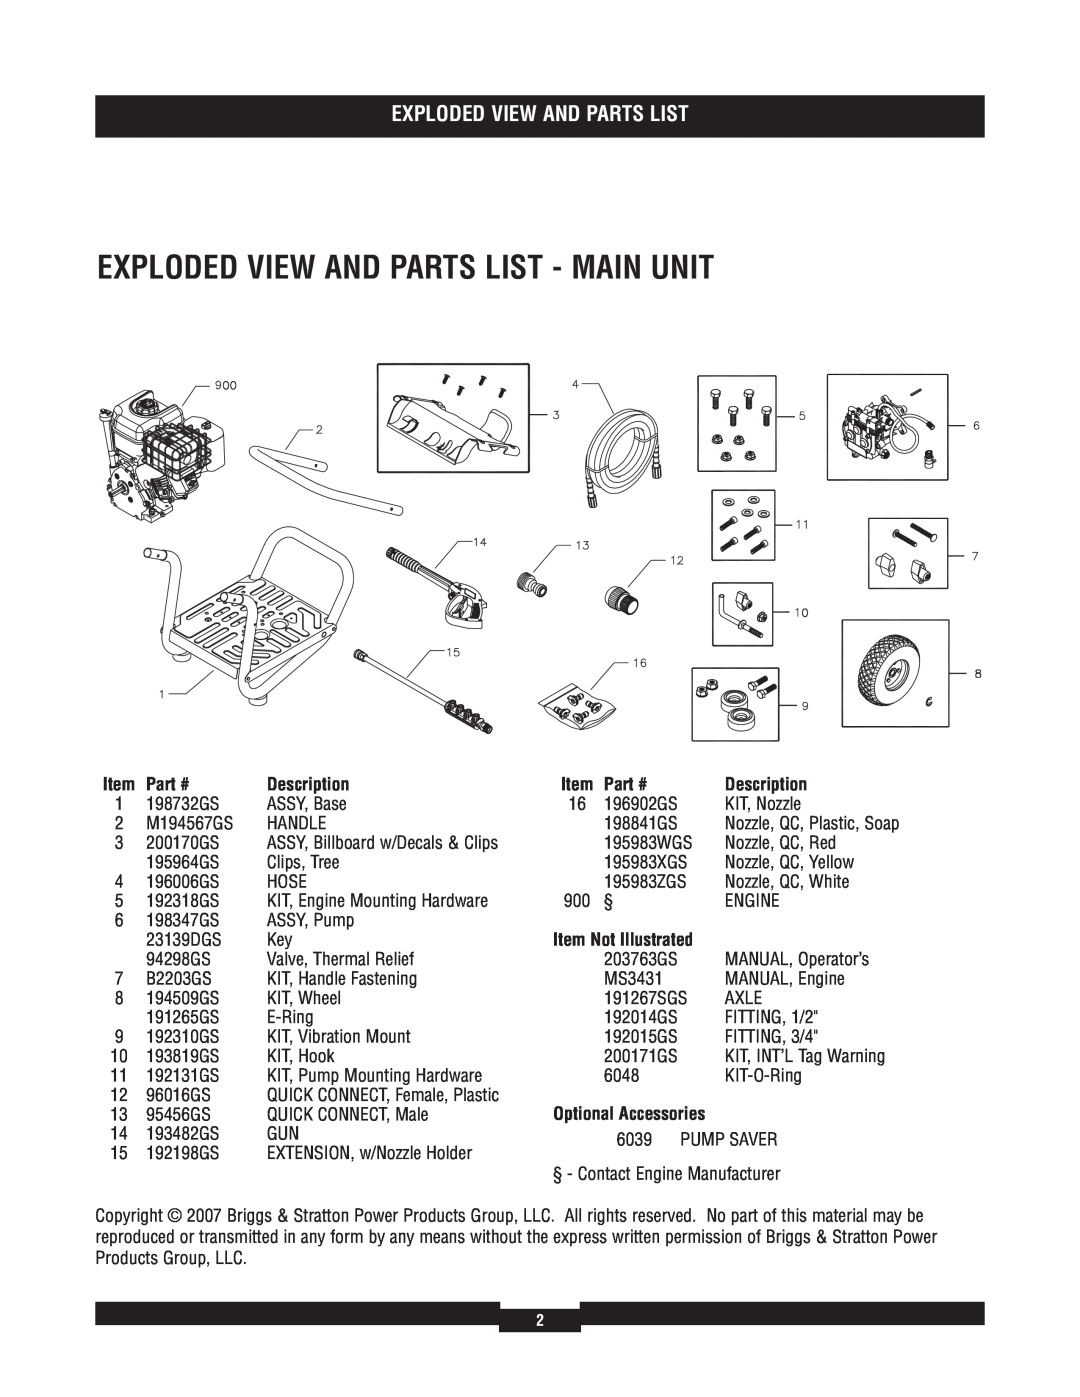 Briggs & Stratton 020224-1 manual Exploded View And Parts List - Main Unit, Part #, Description, Item Not Illustrated 